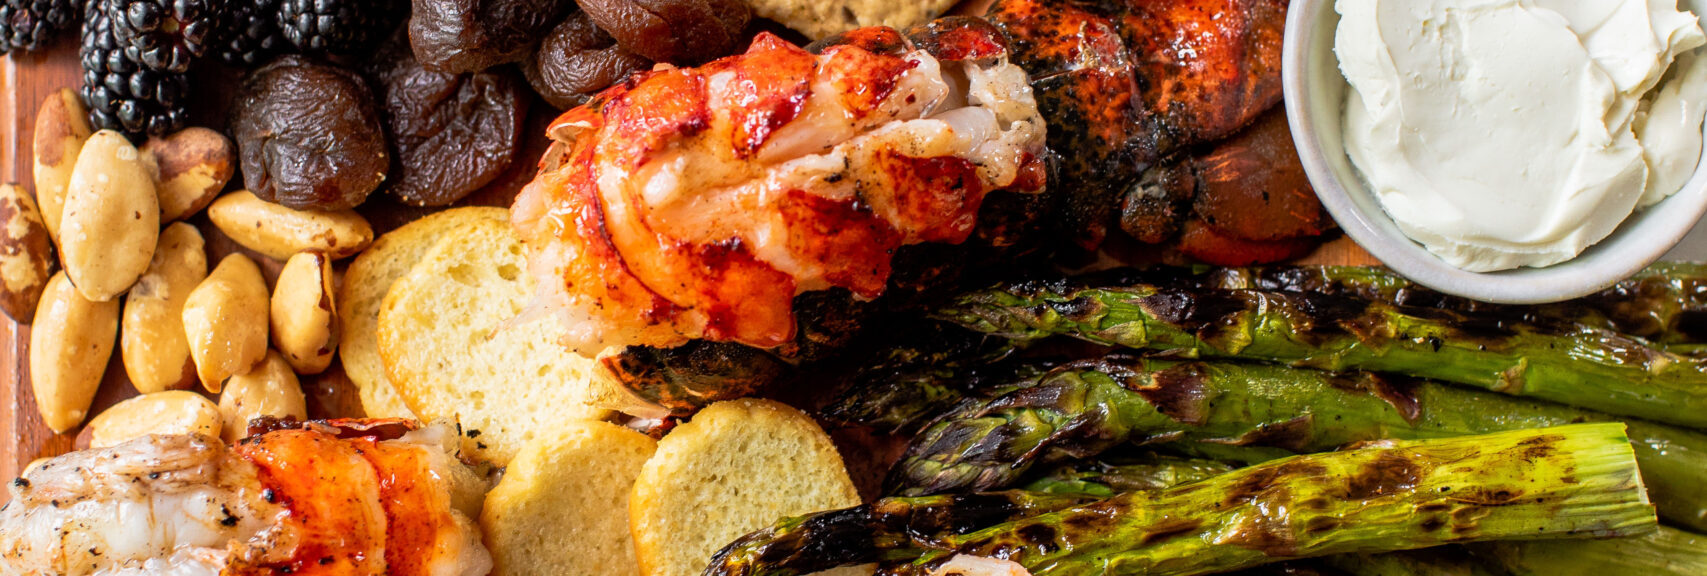 Grilled Maine Lobster Charcuterie Board recipe image